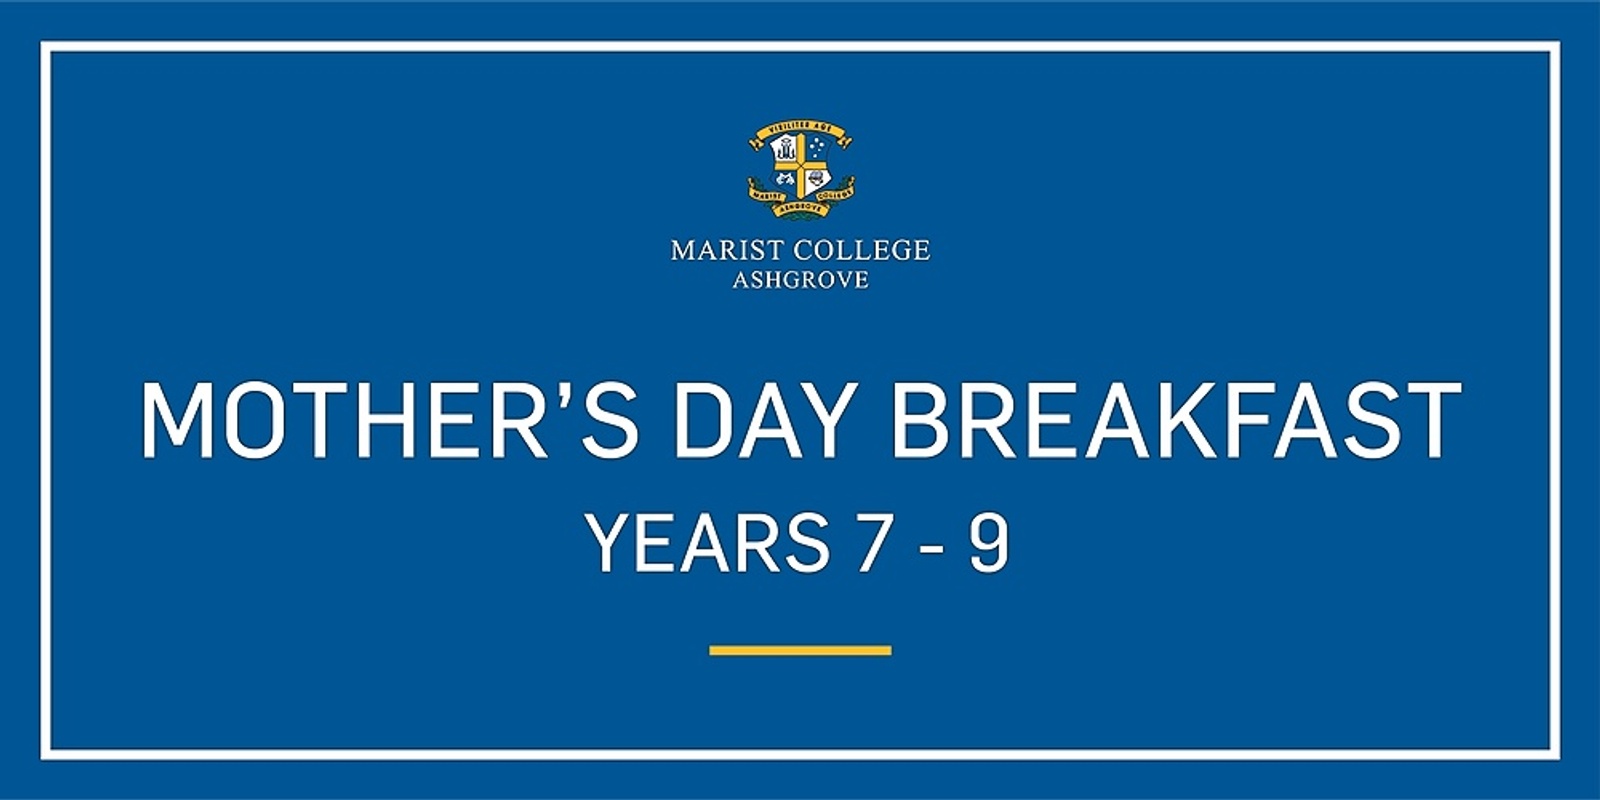 2022 Mother's Day Breakfast - Years 7-9